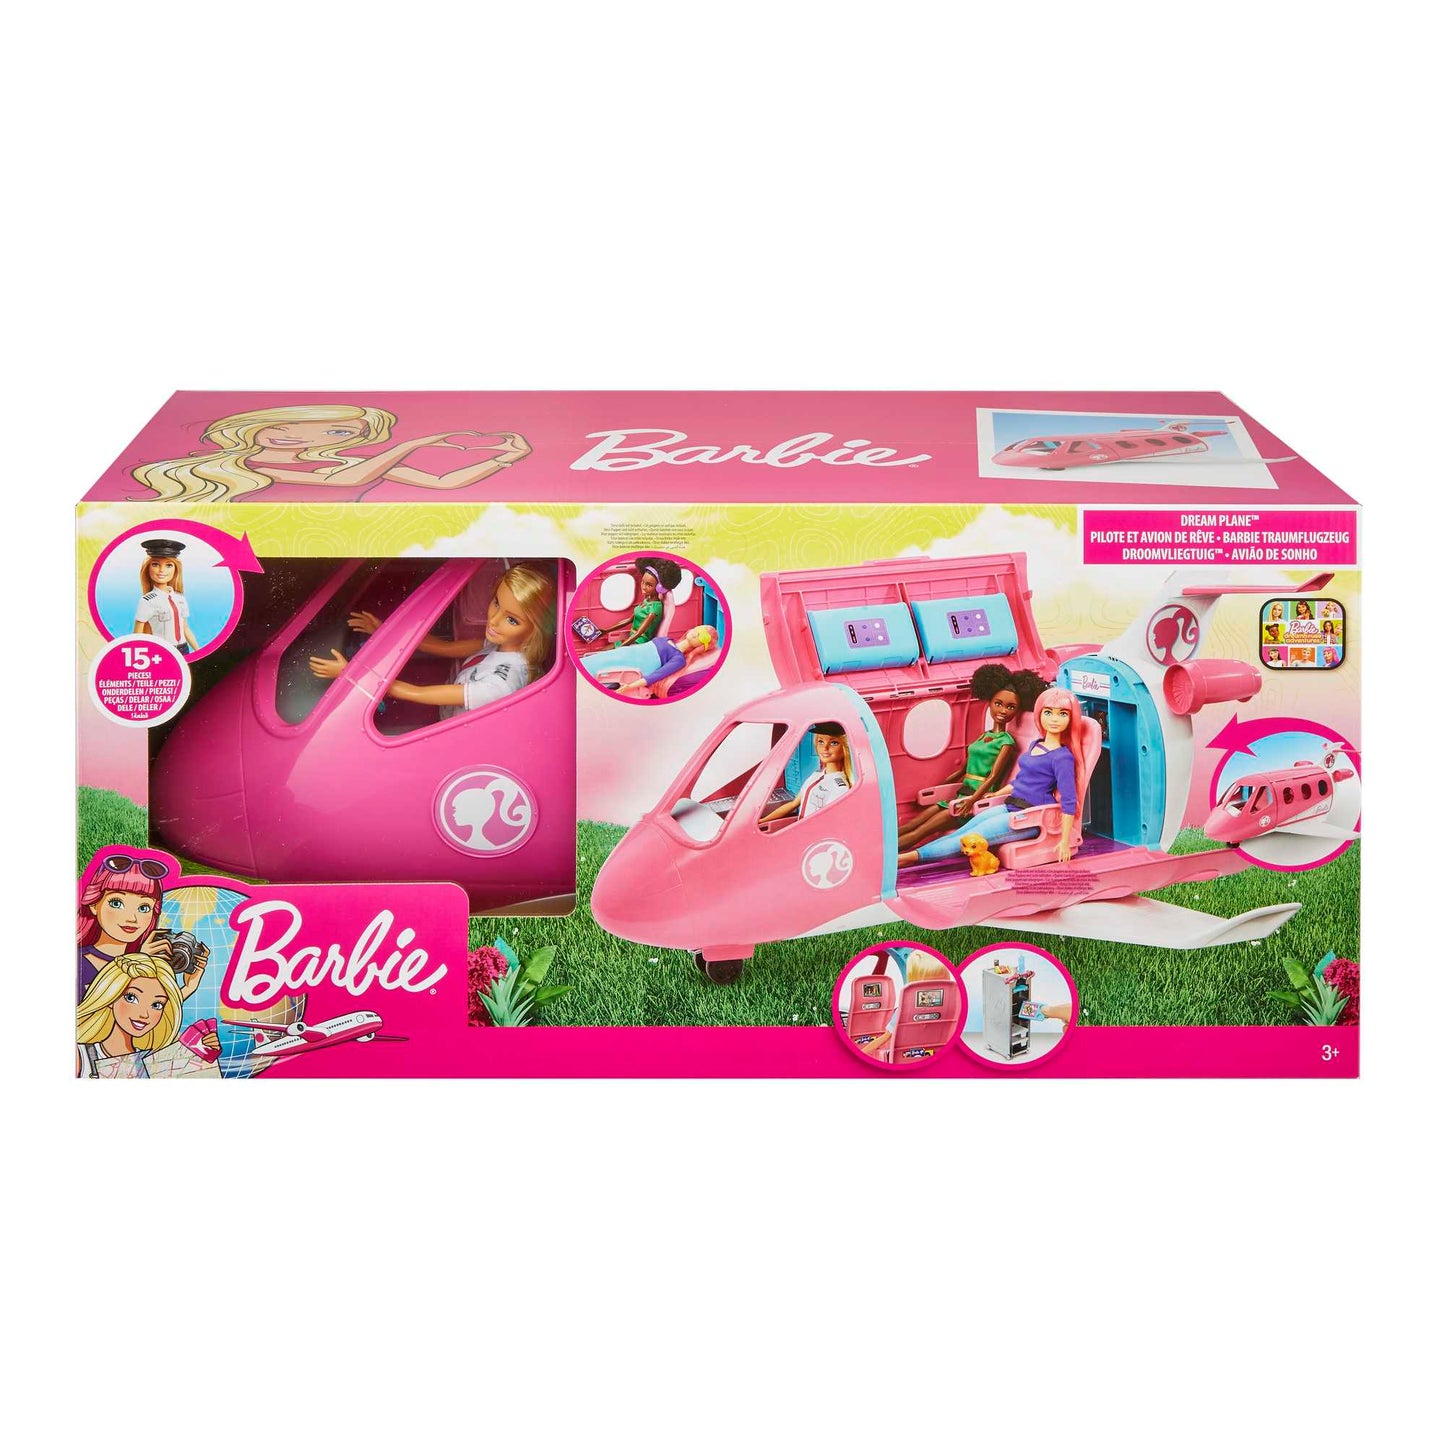 Barbie - Dreamplane Transforming Playset With Doll GJB33